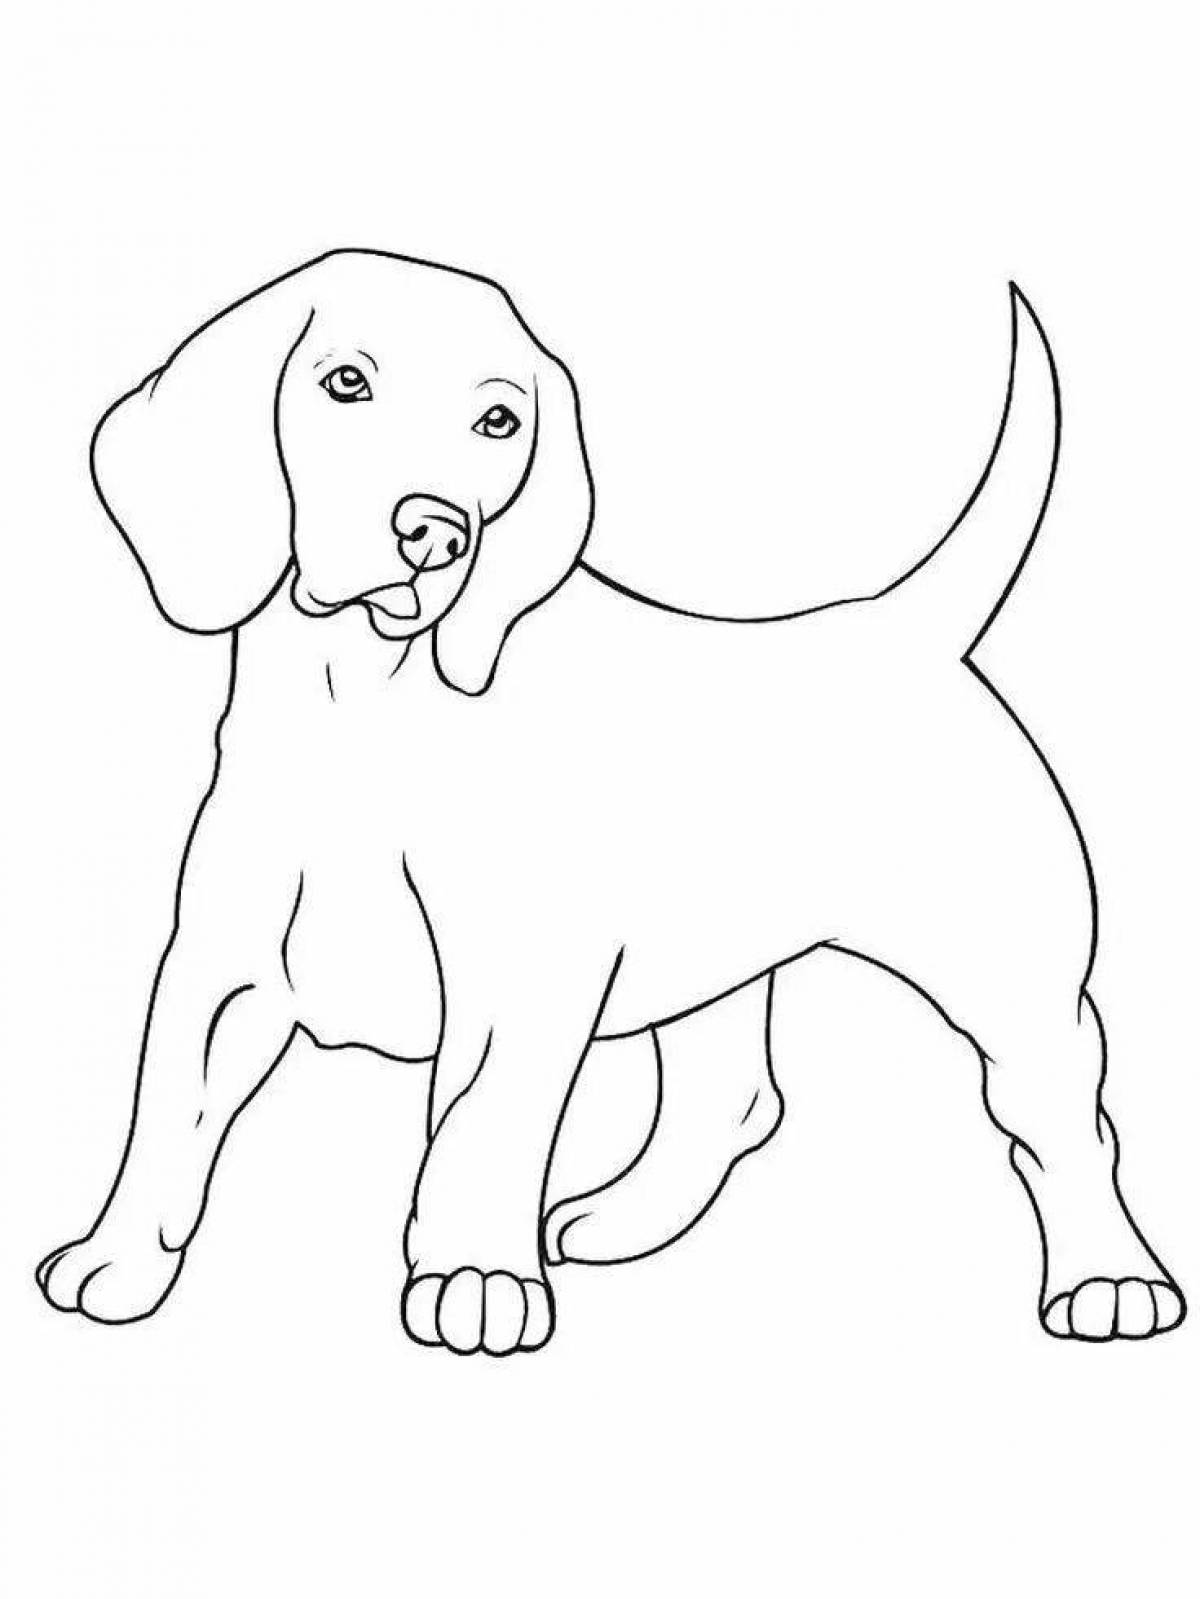 Mischievous dog drawing